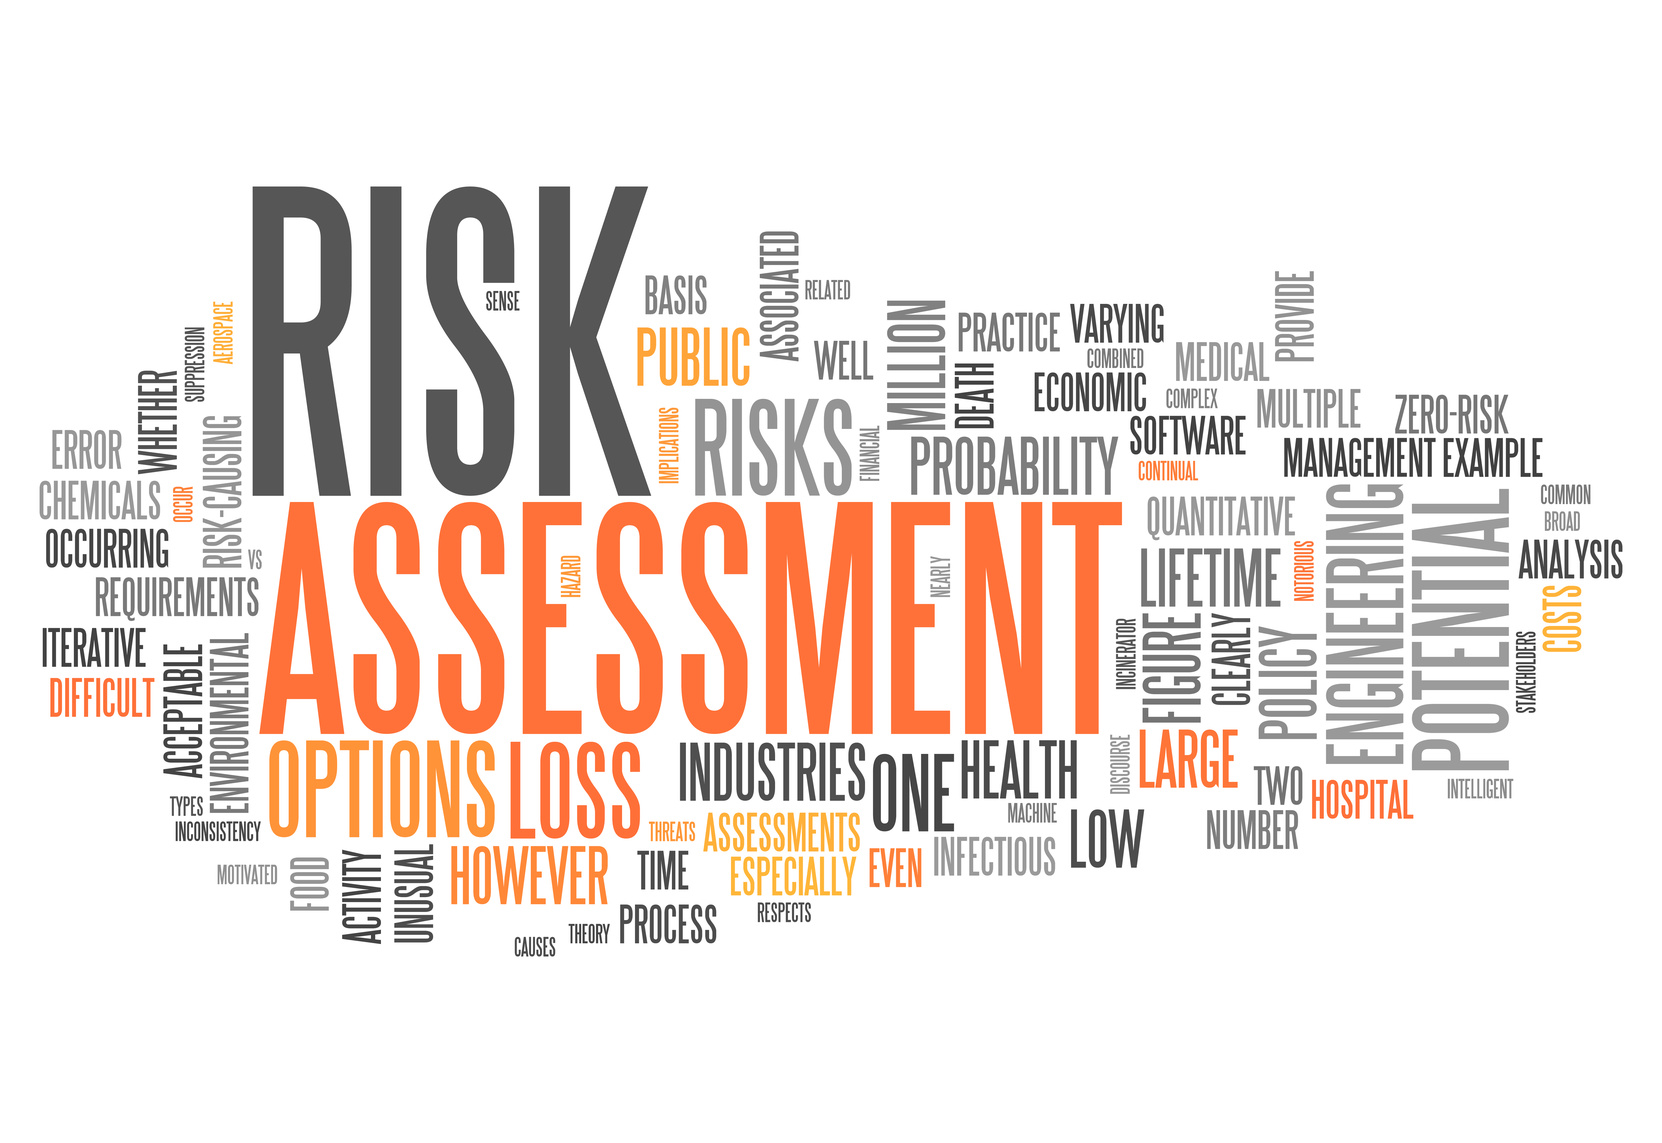 What is a Risk Assessment?